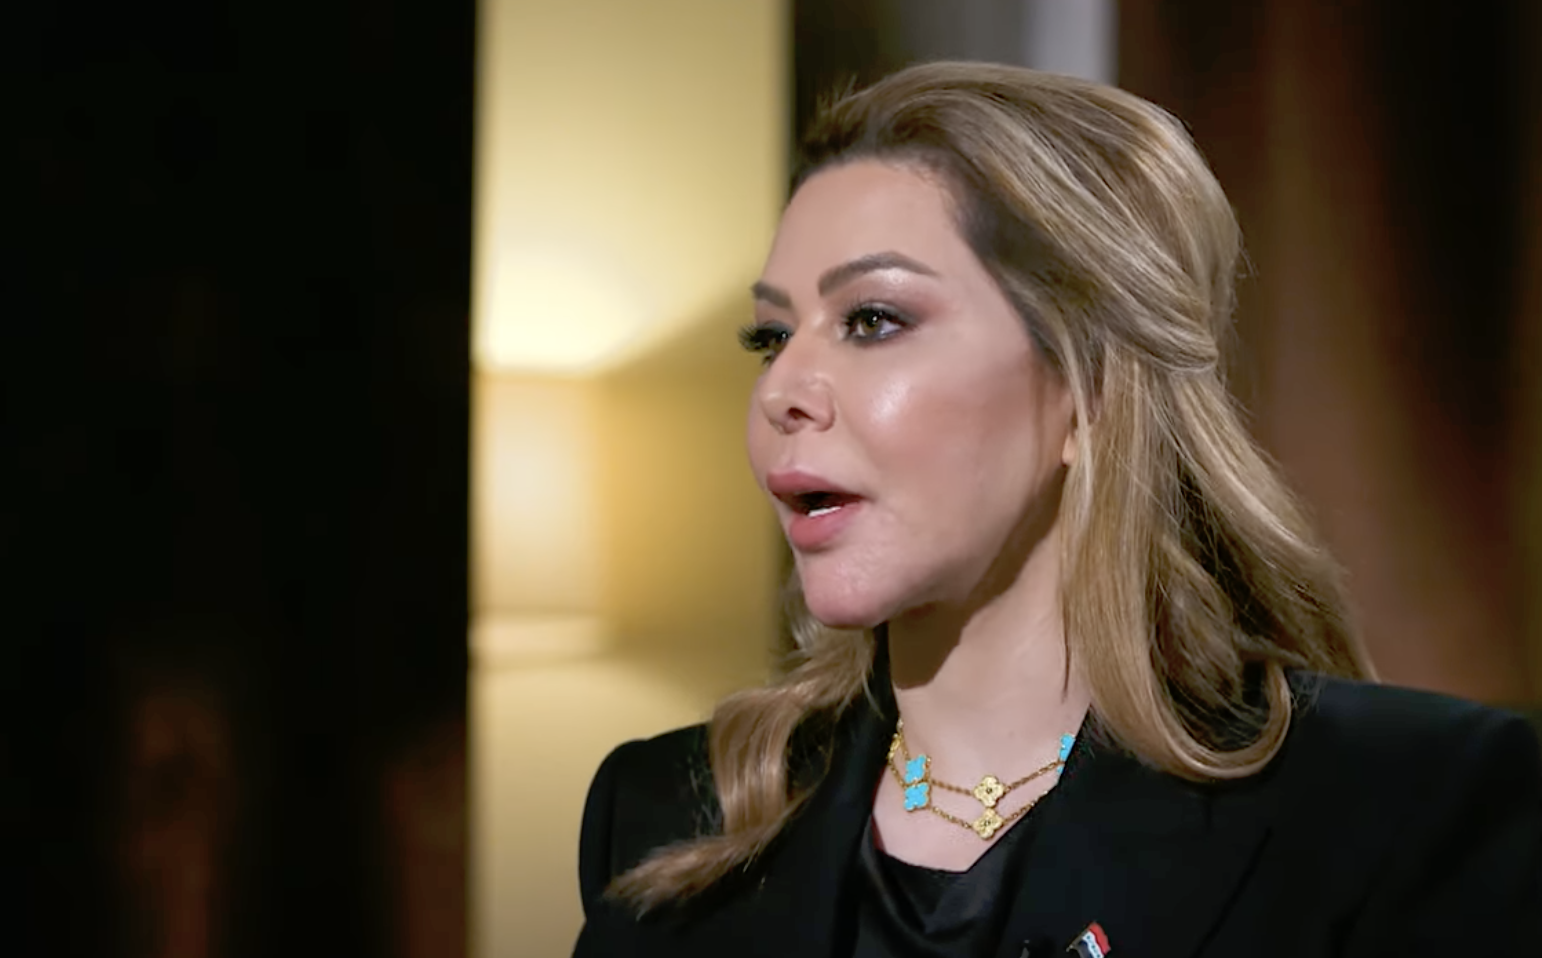 Saddam's exiled daughter looks forward to a role in the political process in Iraq soon